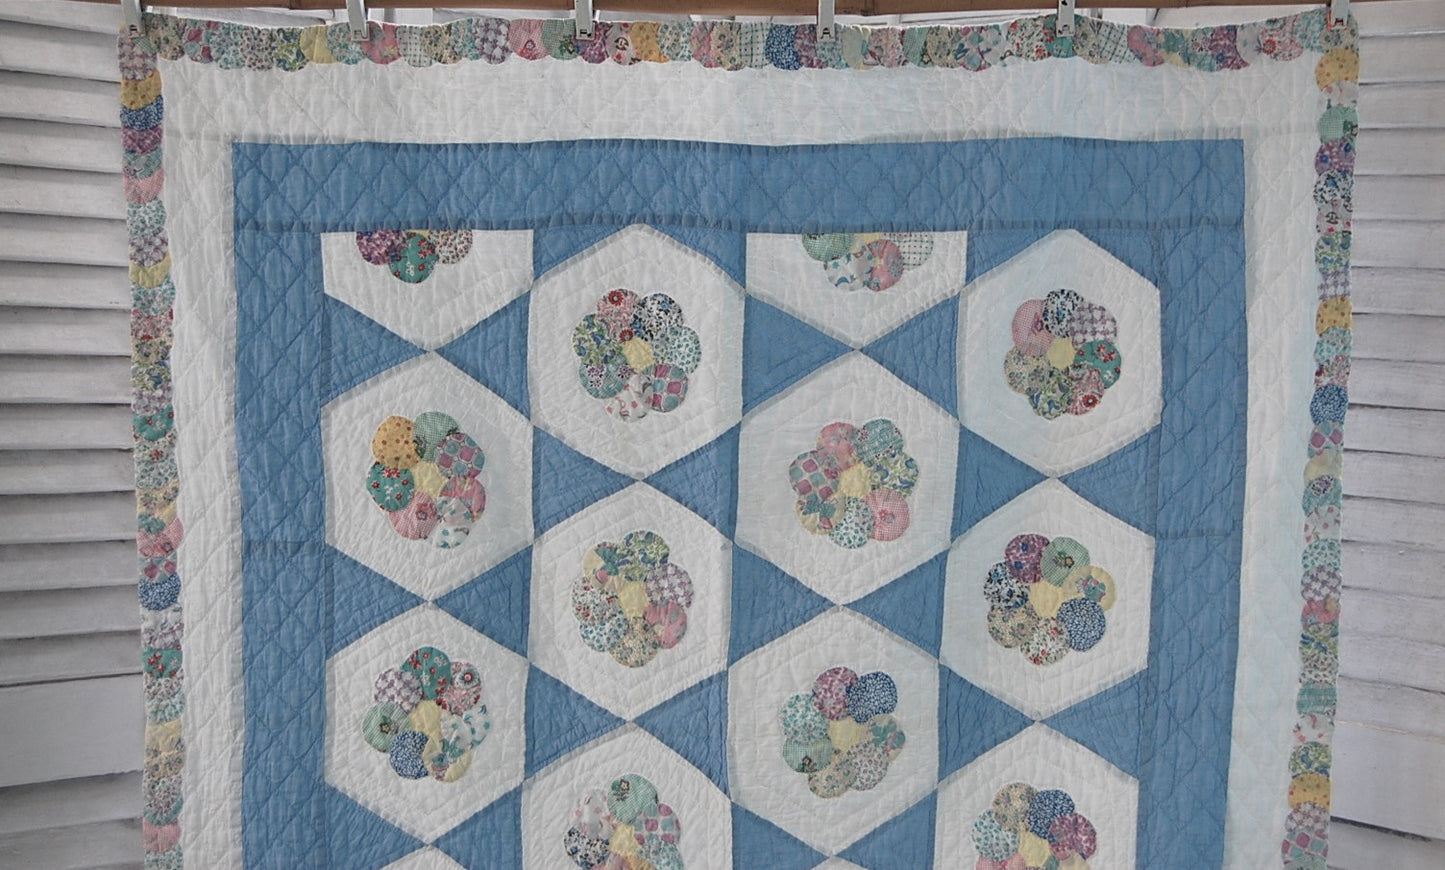 Vintage Piccadilly Circus quilt